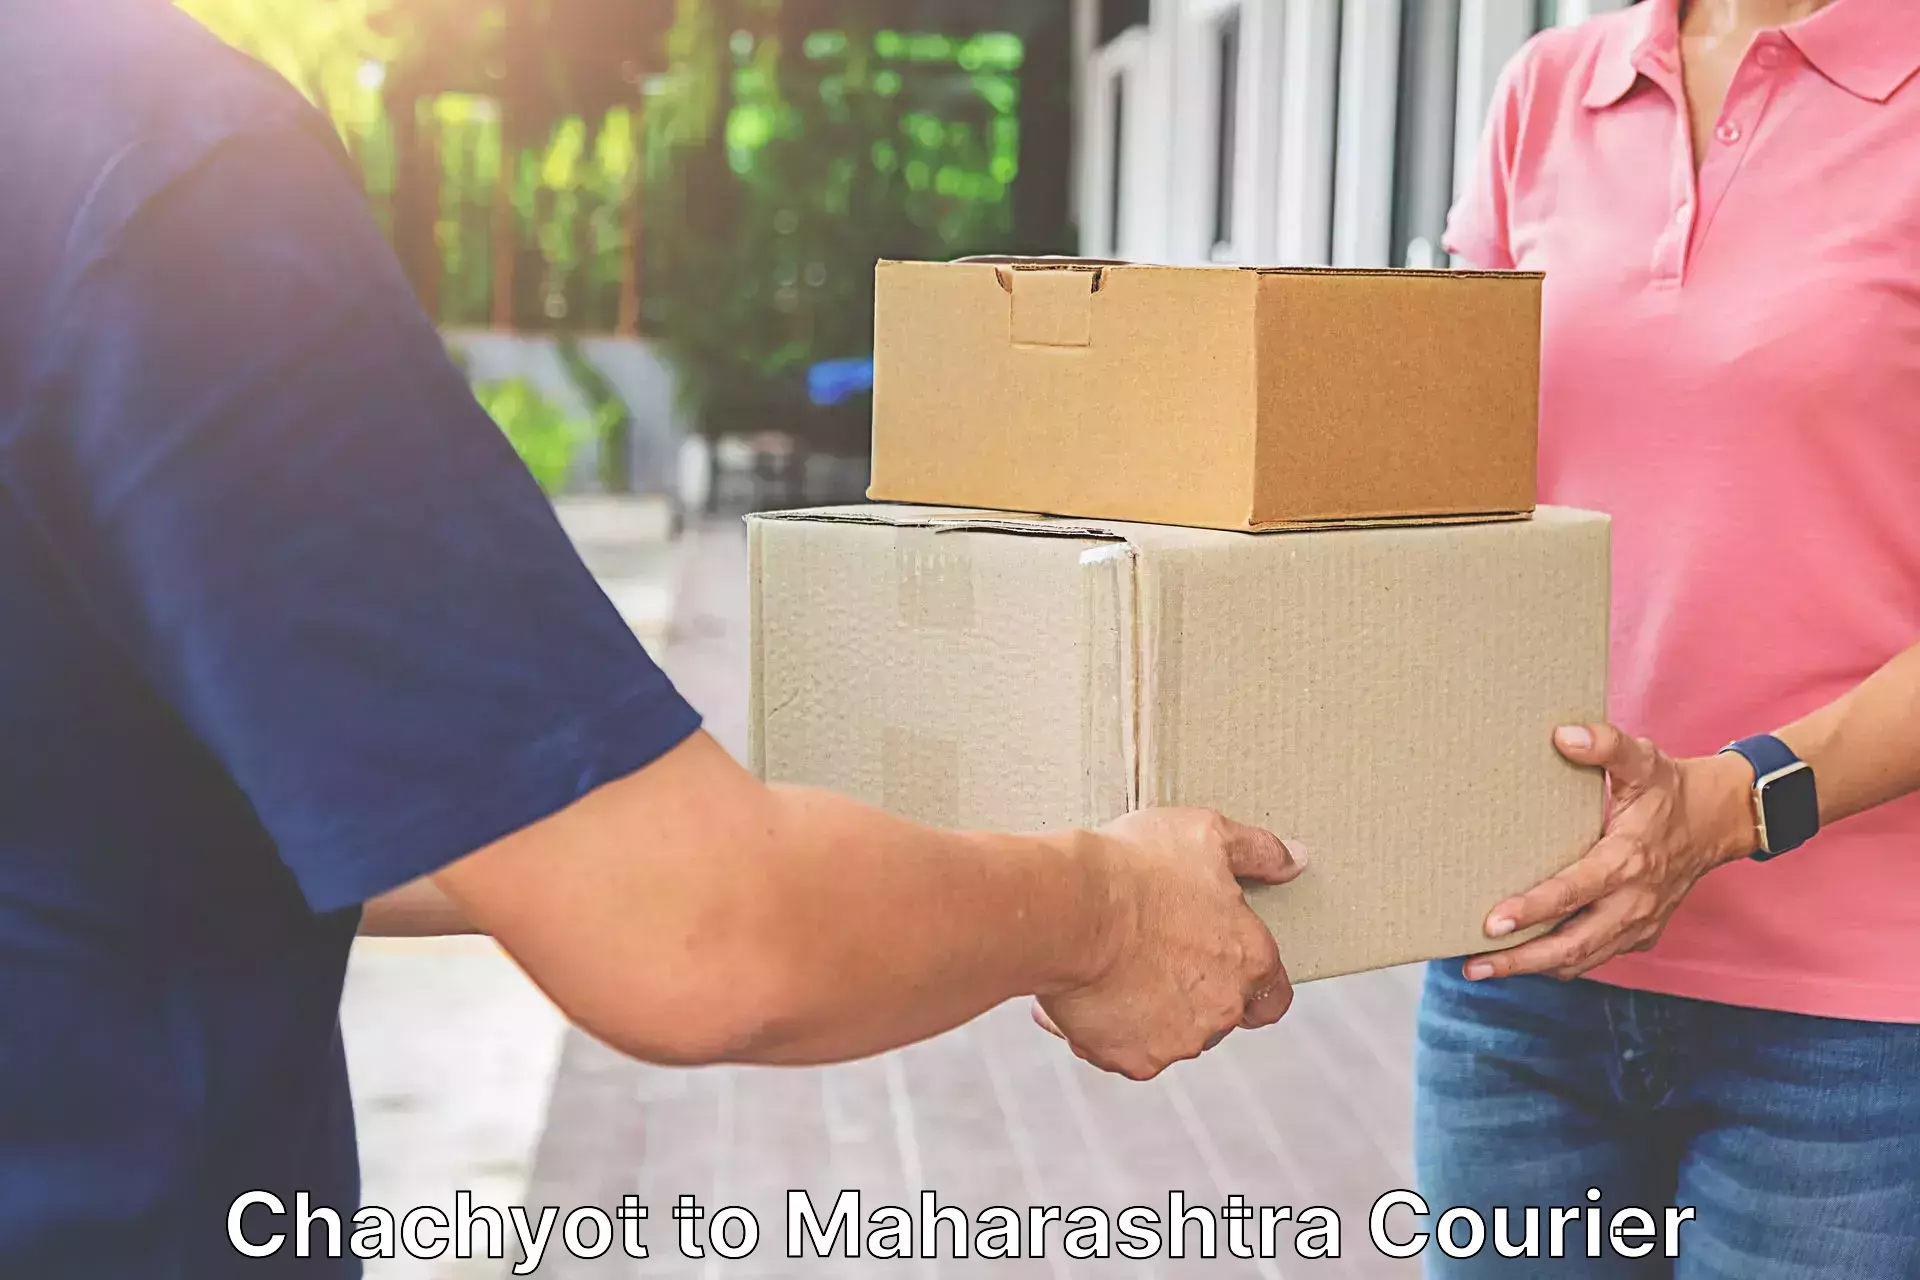 Advanced logistics management in Chachyot to Mahabaleshwar